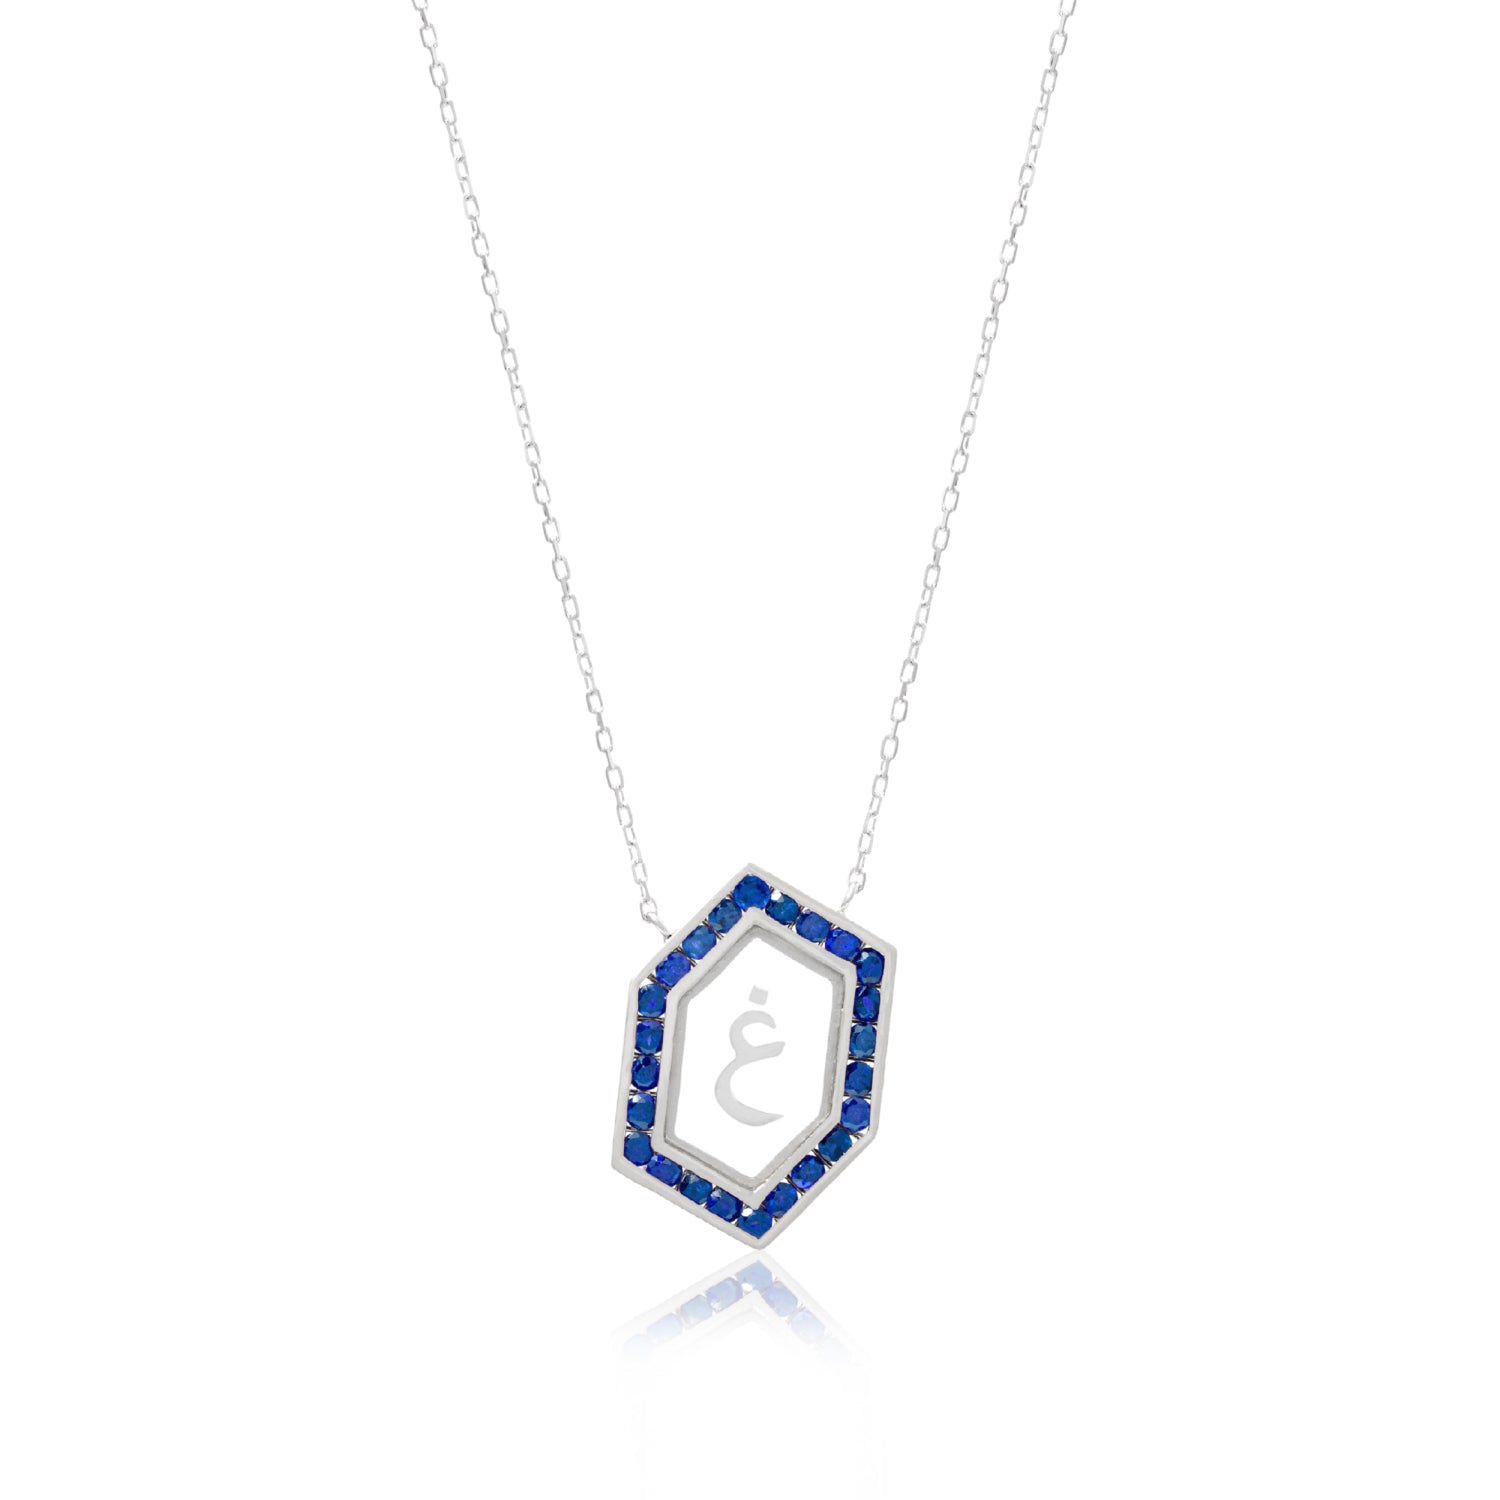 Qamoos 1.0 Letter غ Sapphire Necklace in White Gold